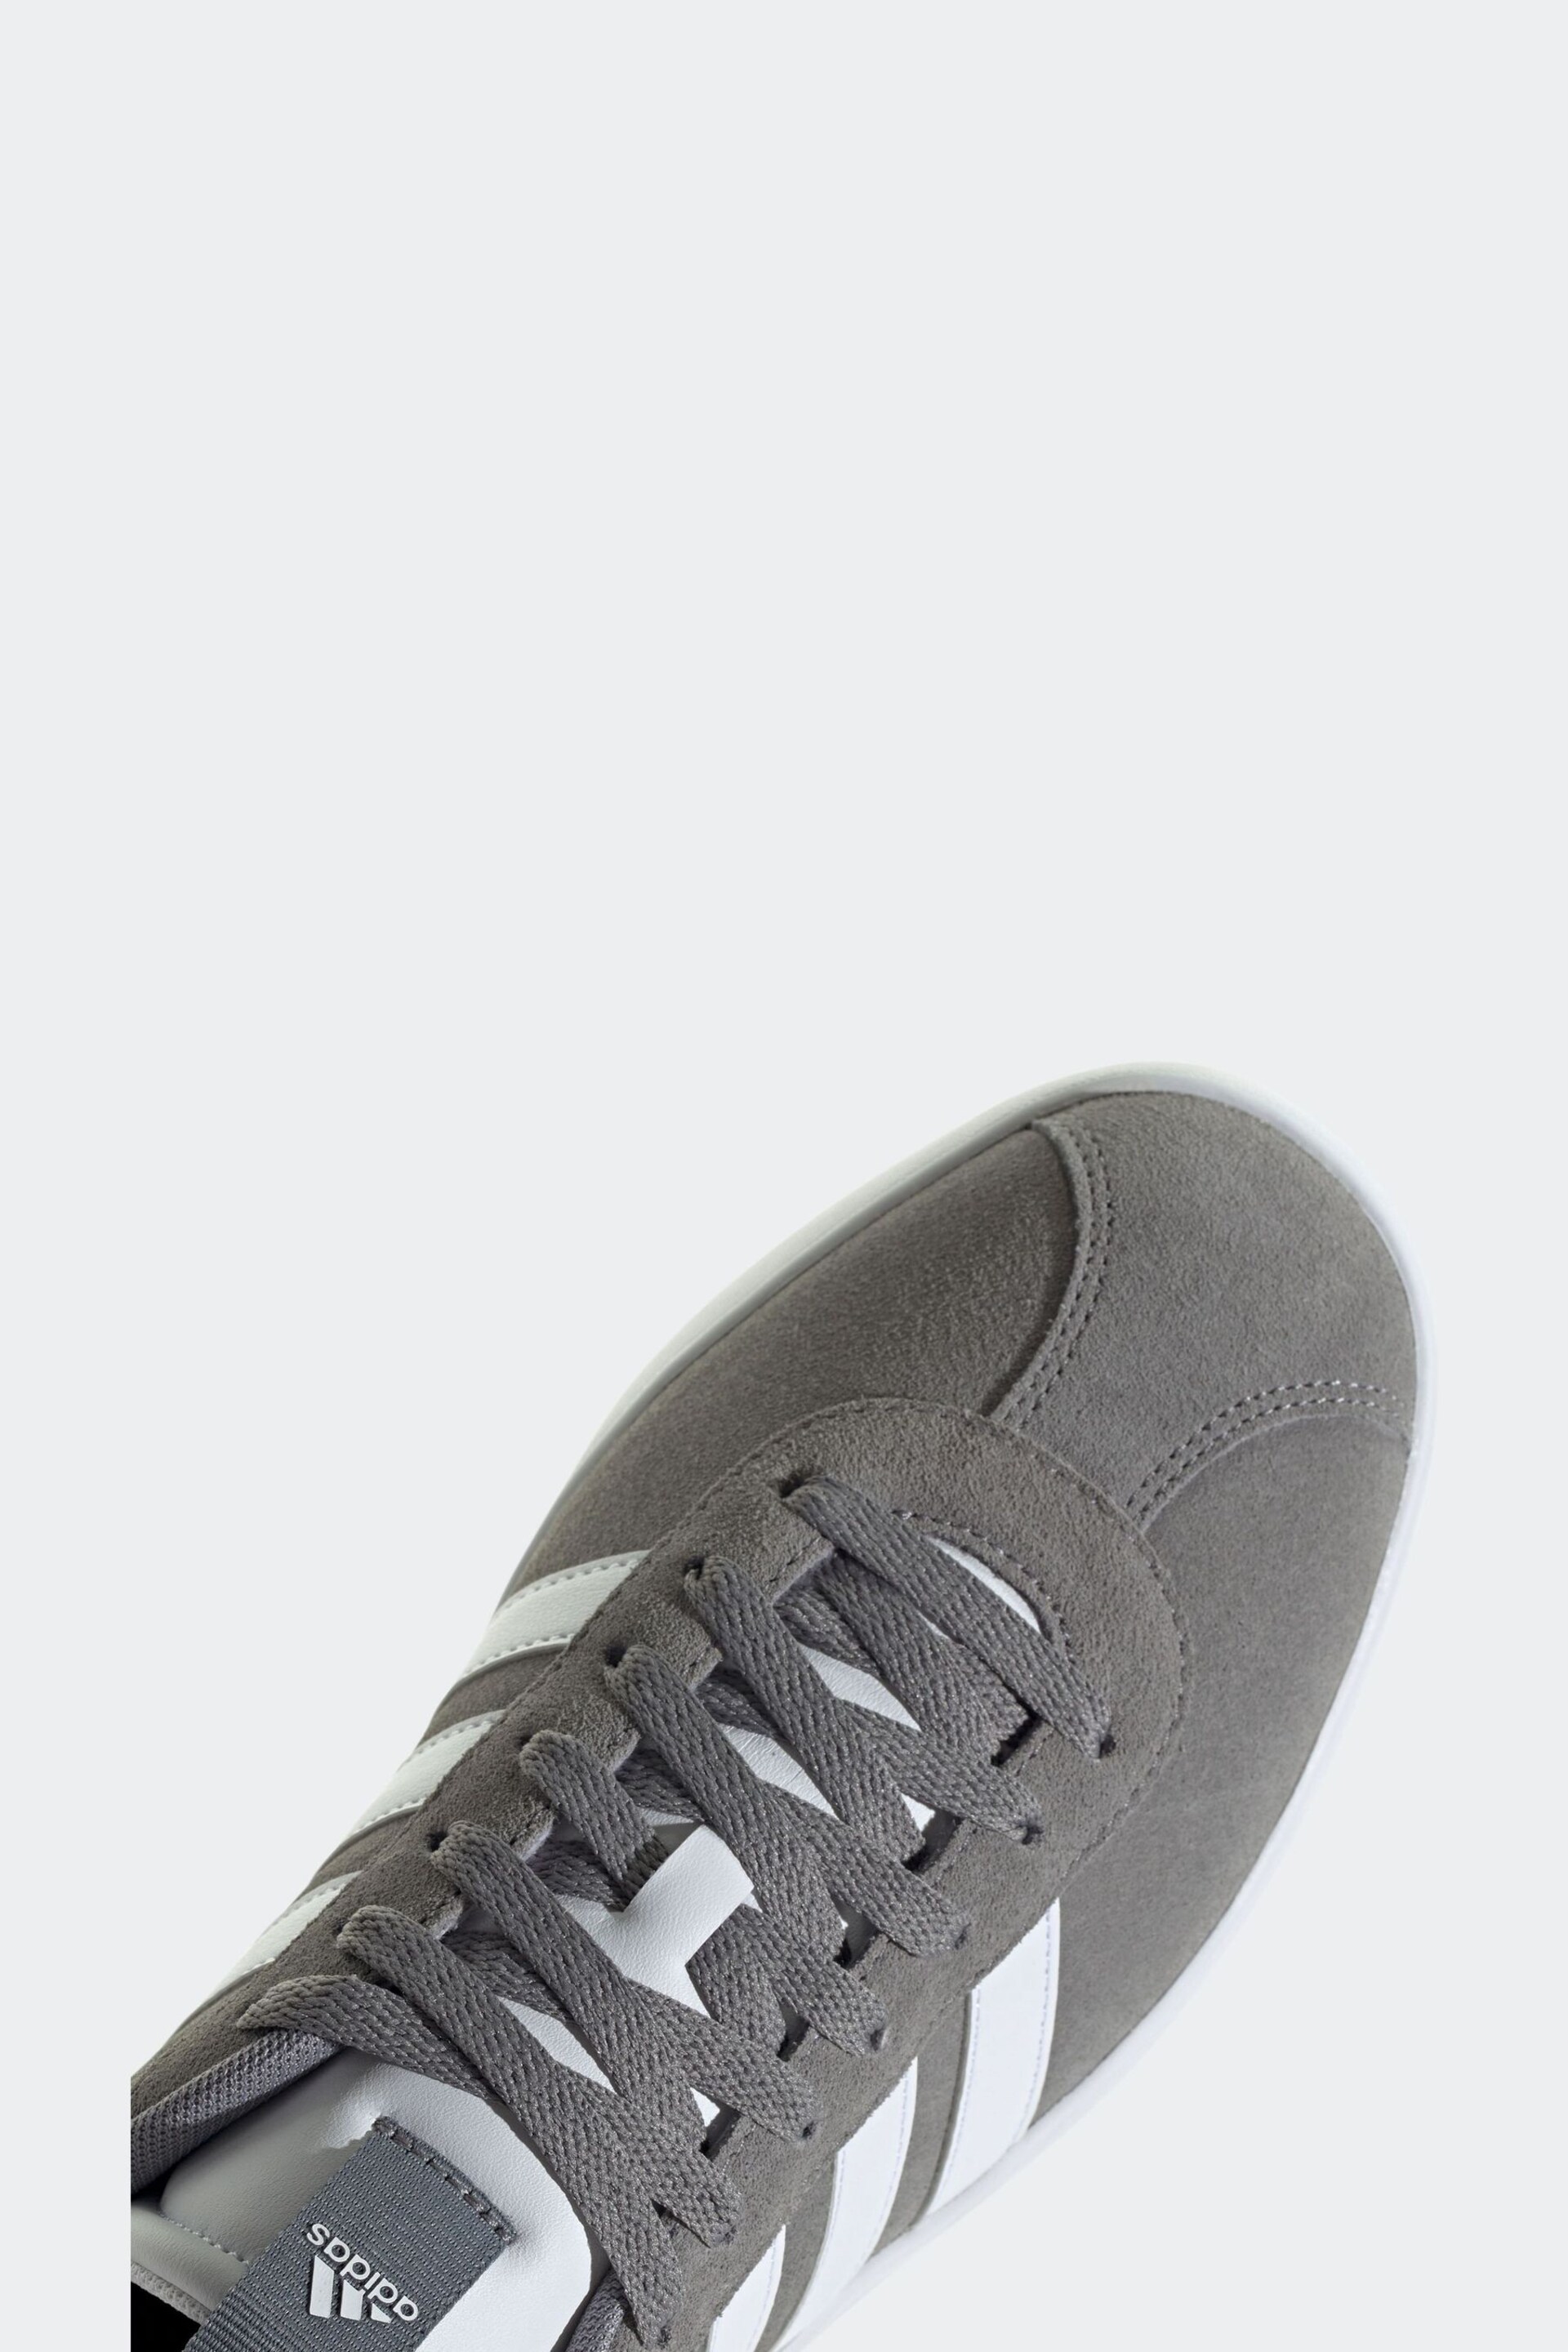 adidas Grey/White VL Court 3.0 Trainers - Image 9 of 11